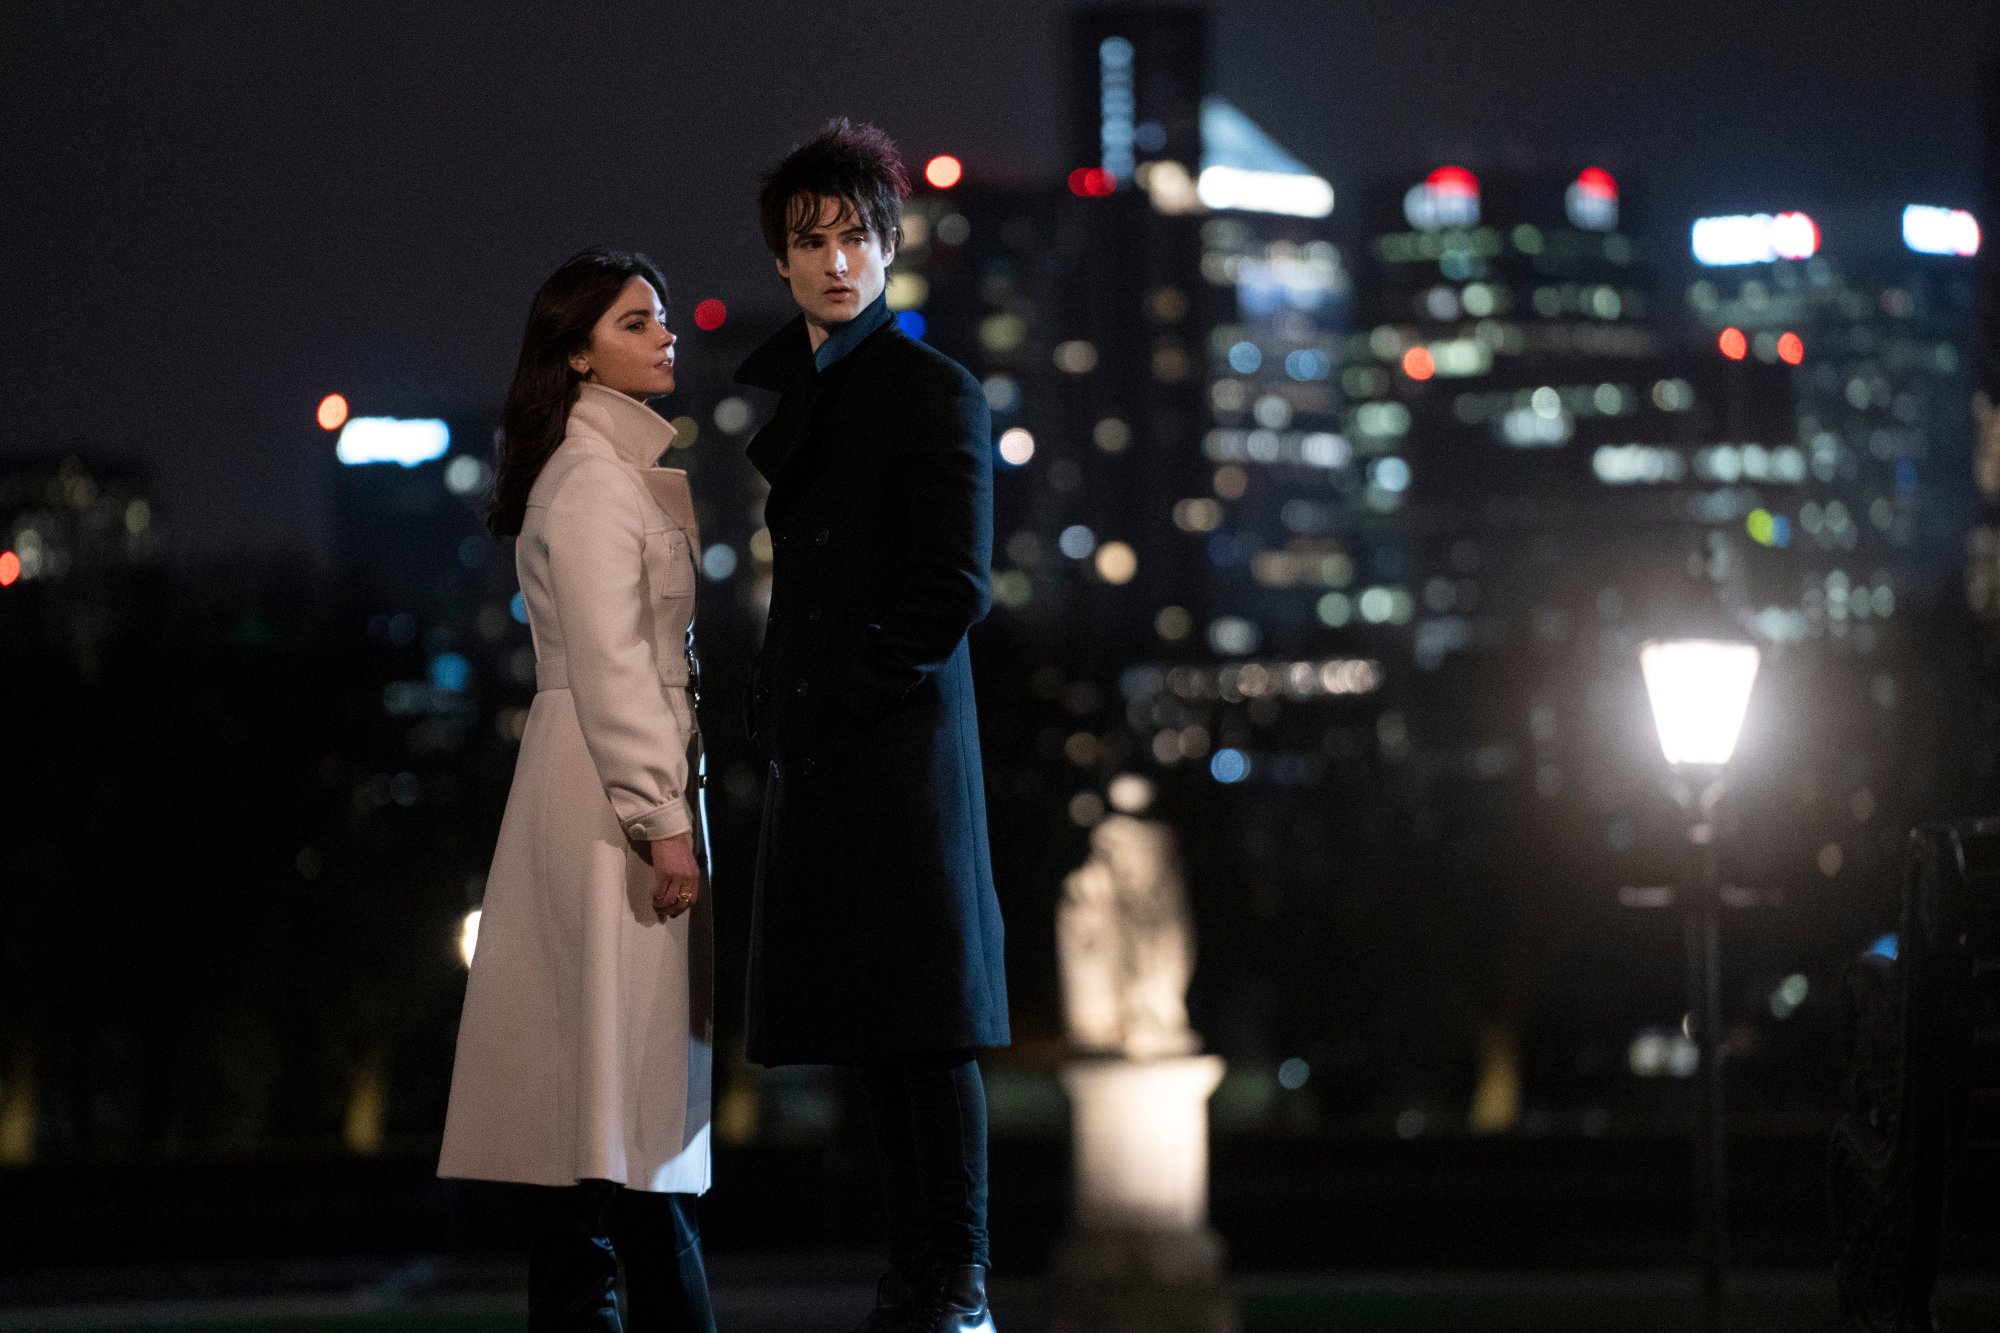 Jenna Coleman and Tom Sturridge in our article about 'The Sandman' Season 2. The pair is standing next to one another, and the city is behind them.